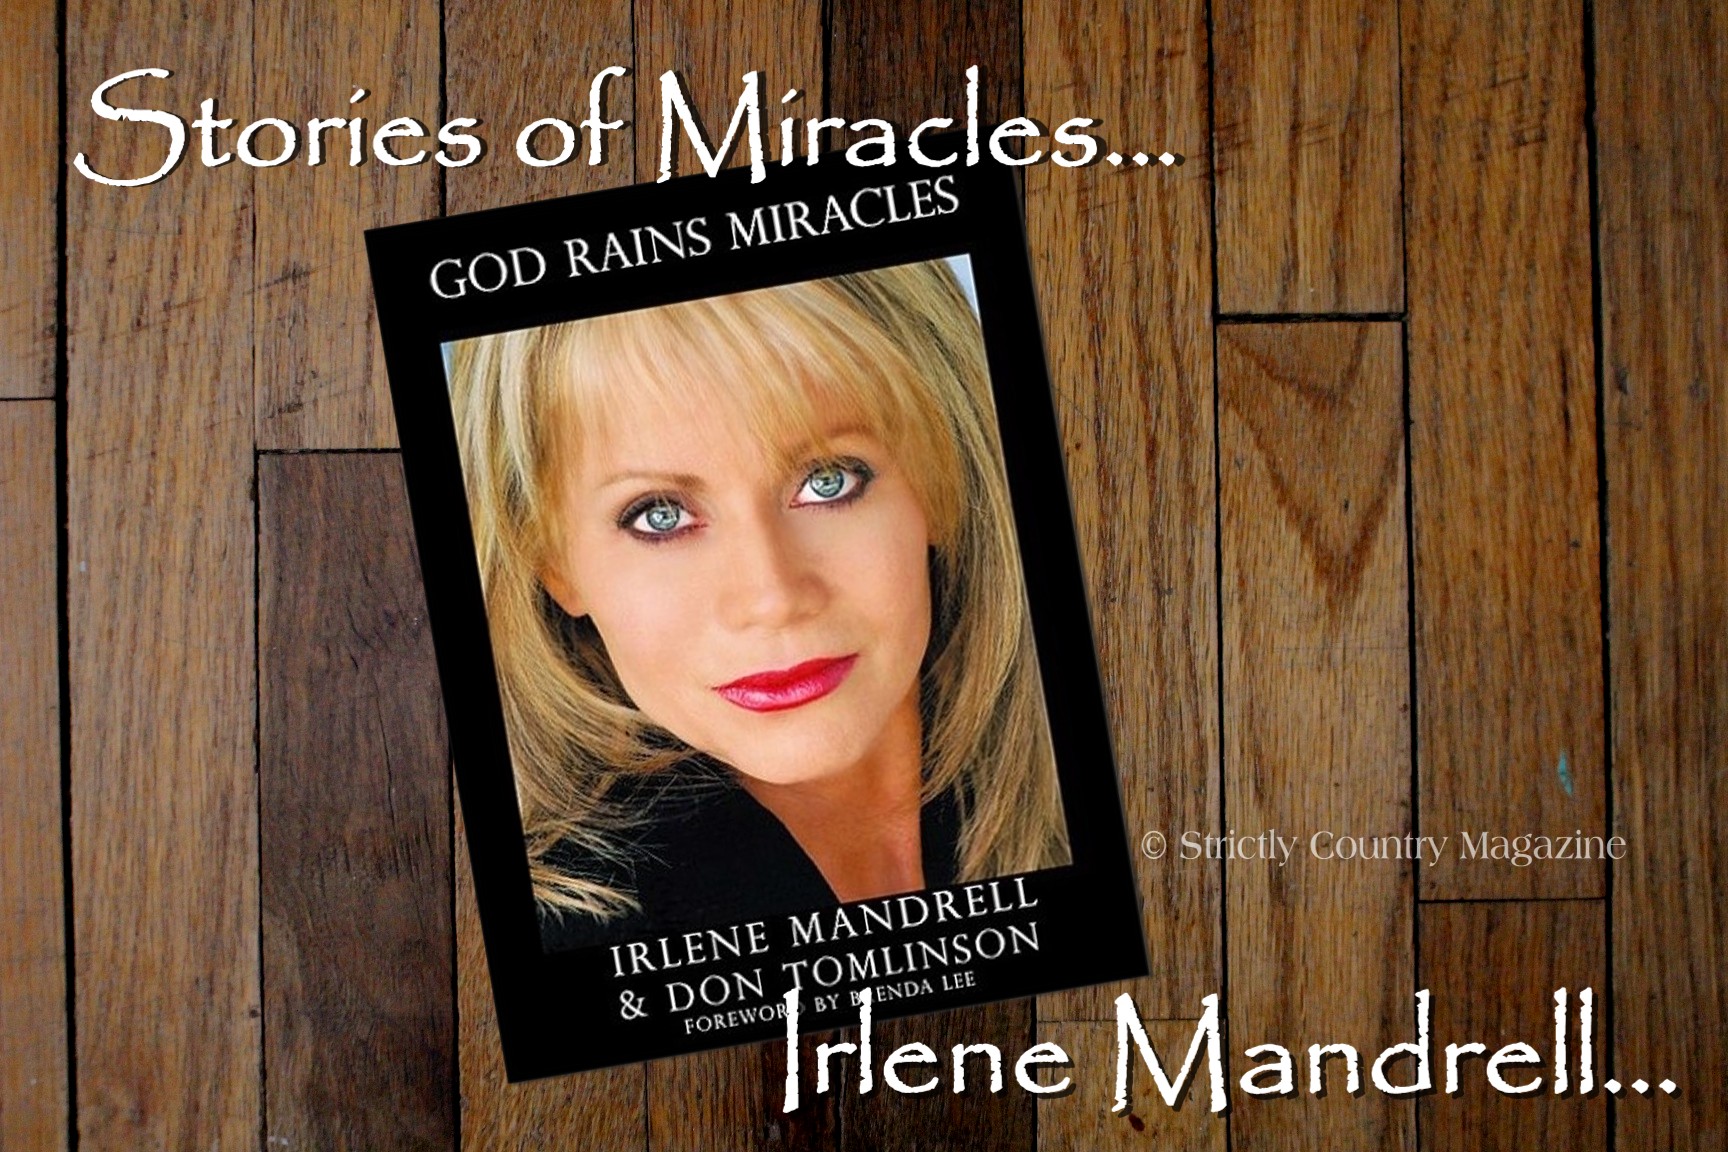 Strictly Country Magazine copyright Irlene Mandrell God Rains Miracles title